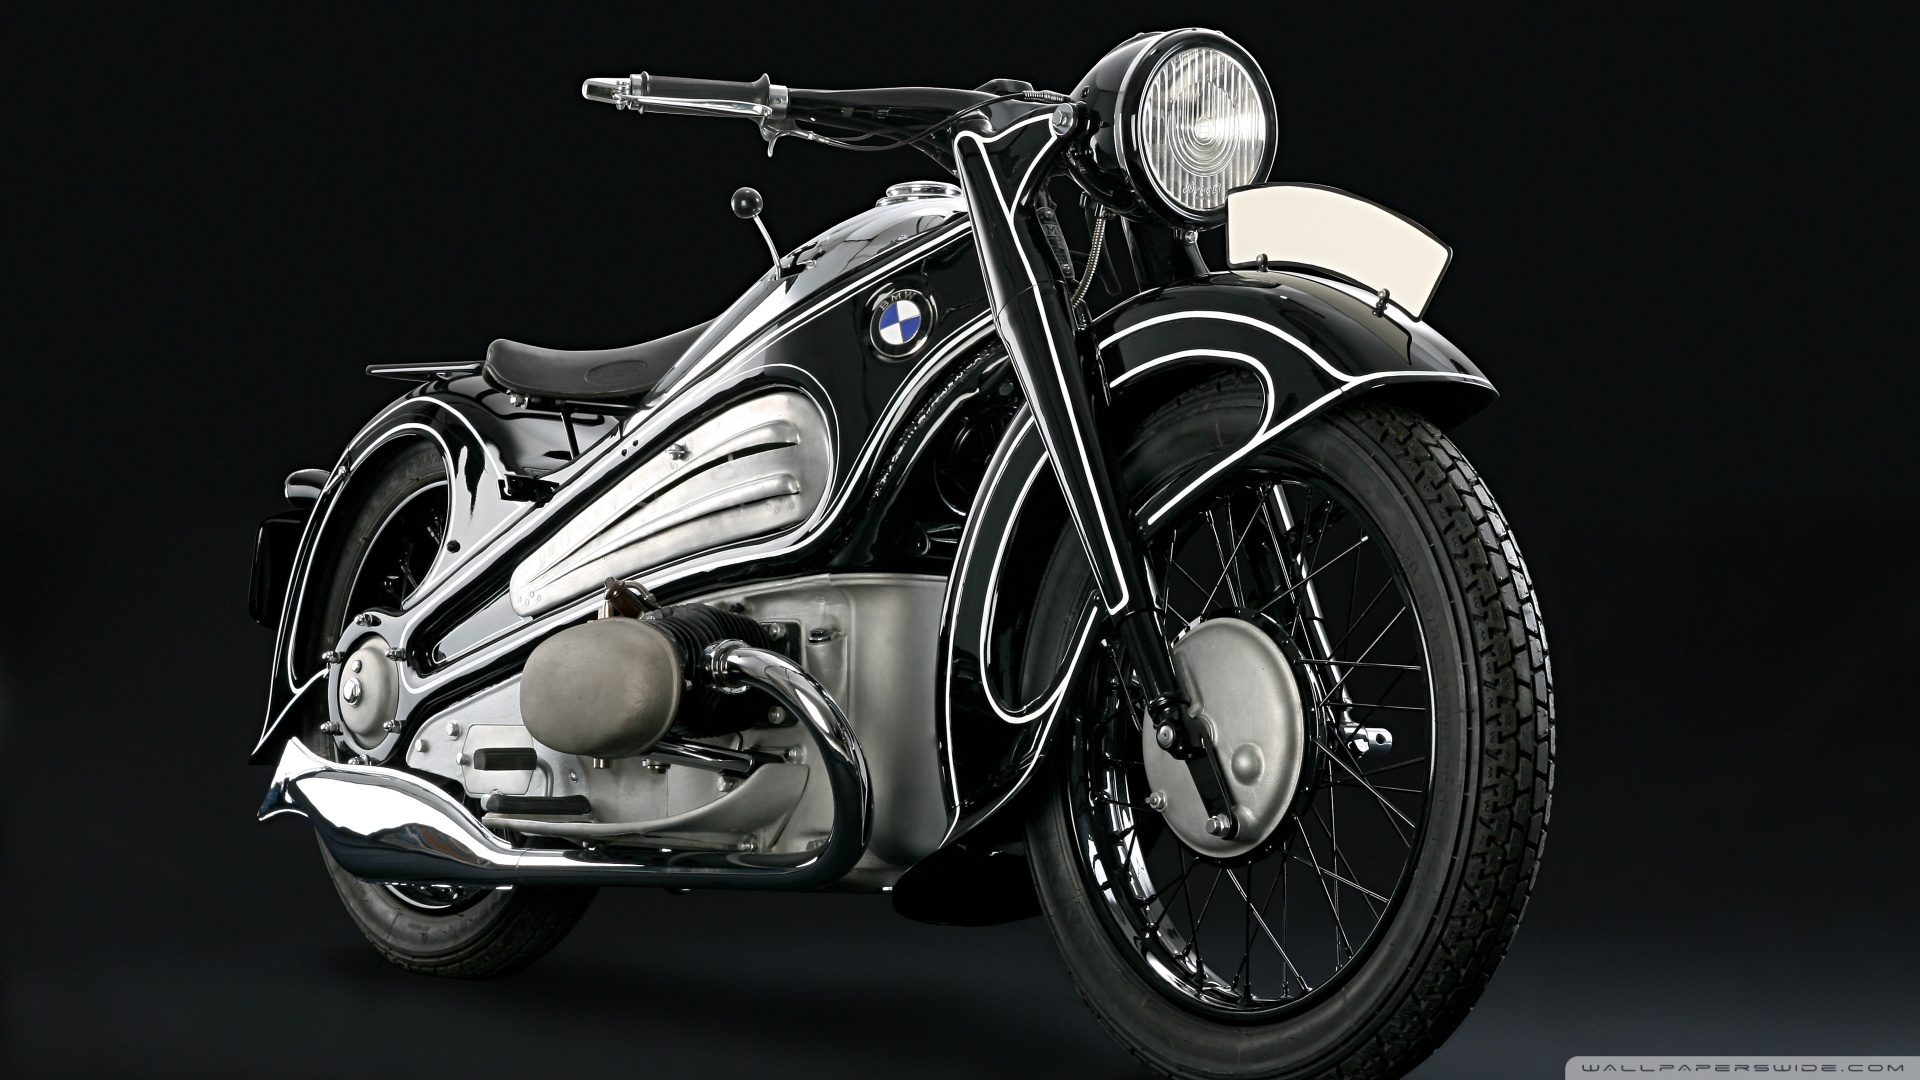 1934 Bmw R7 Concept Motorcycle - HD Wallpaper 